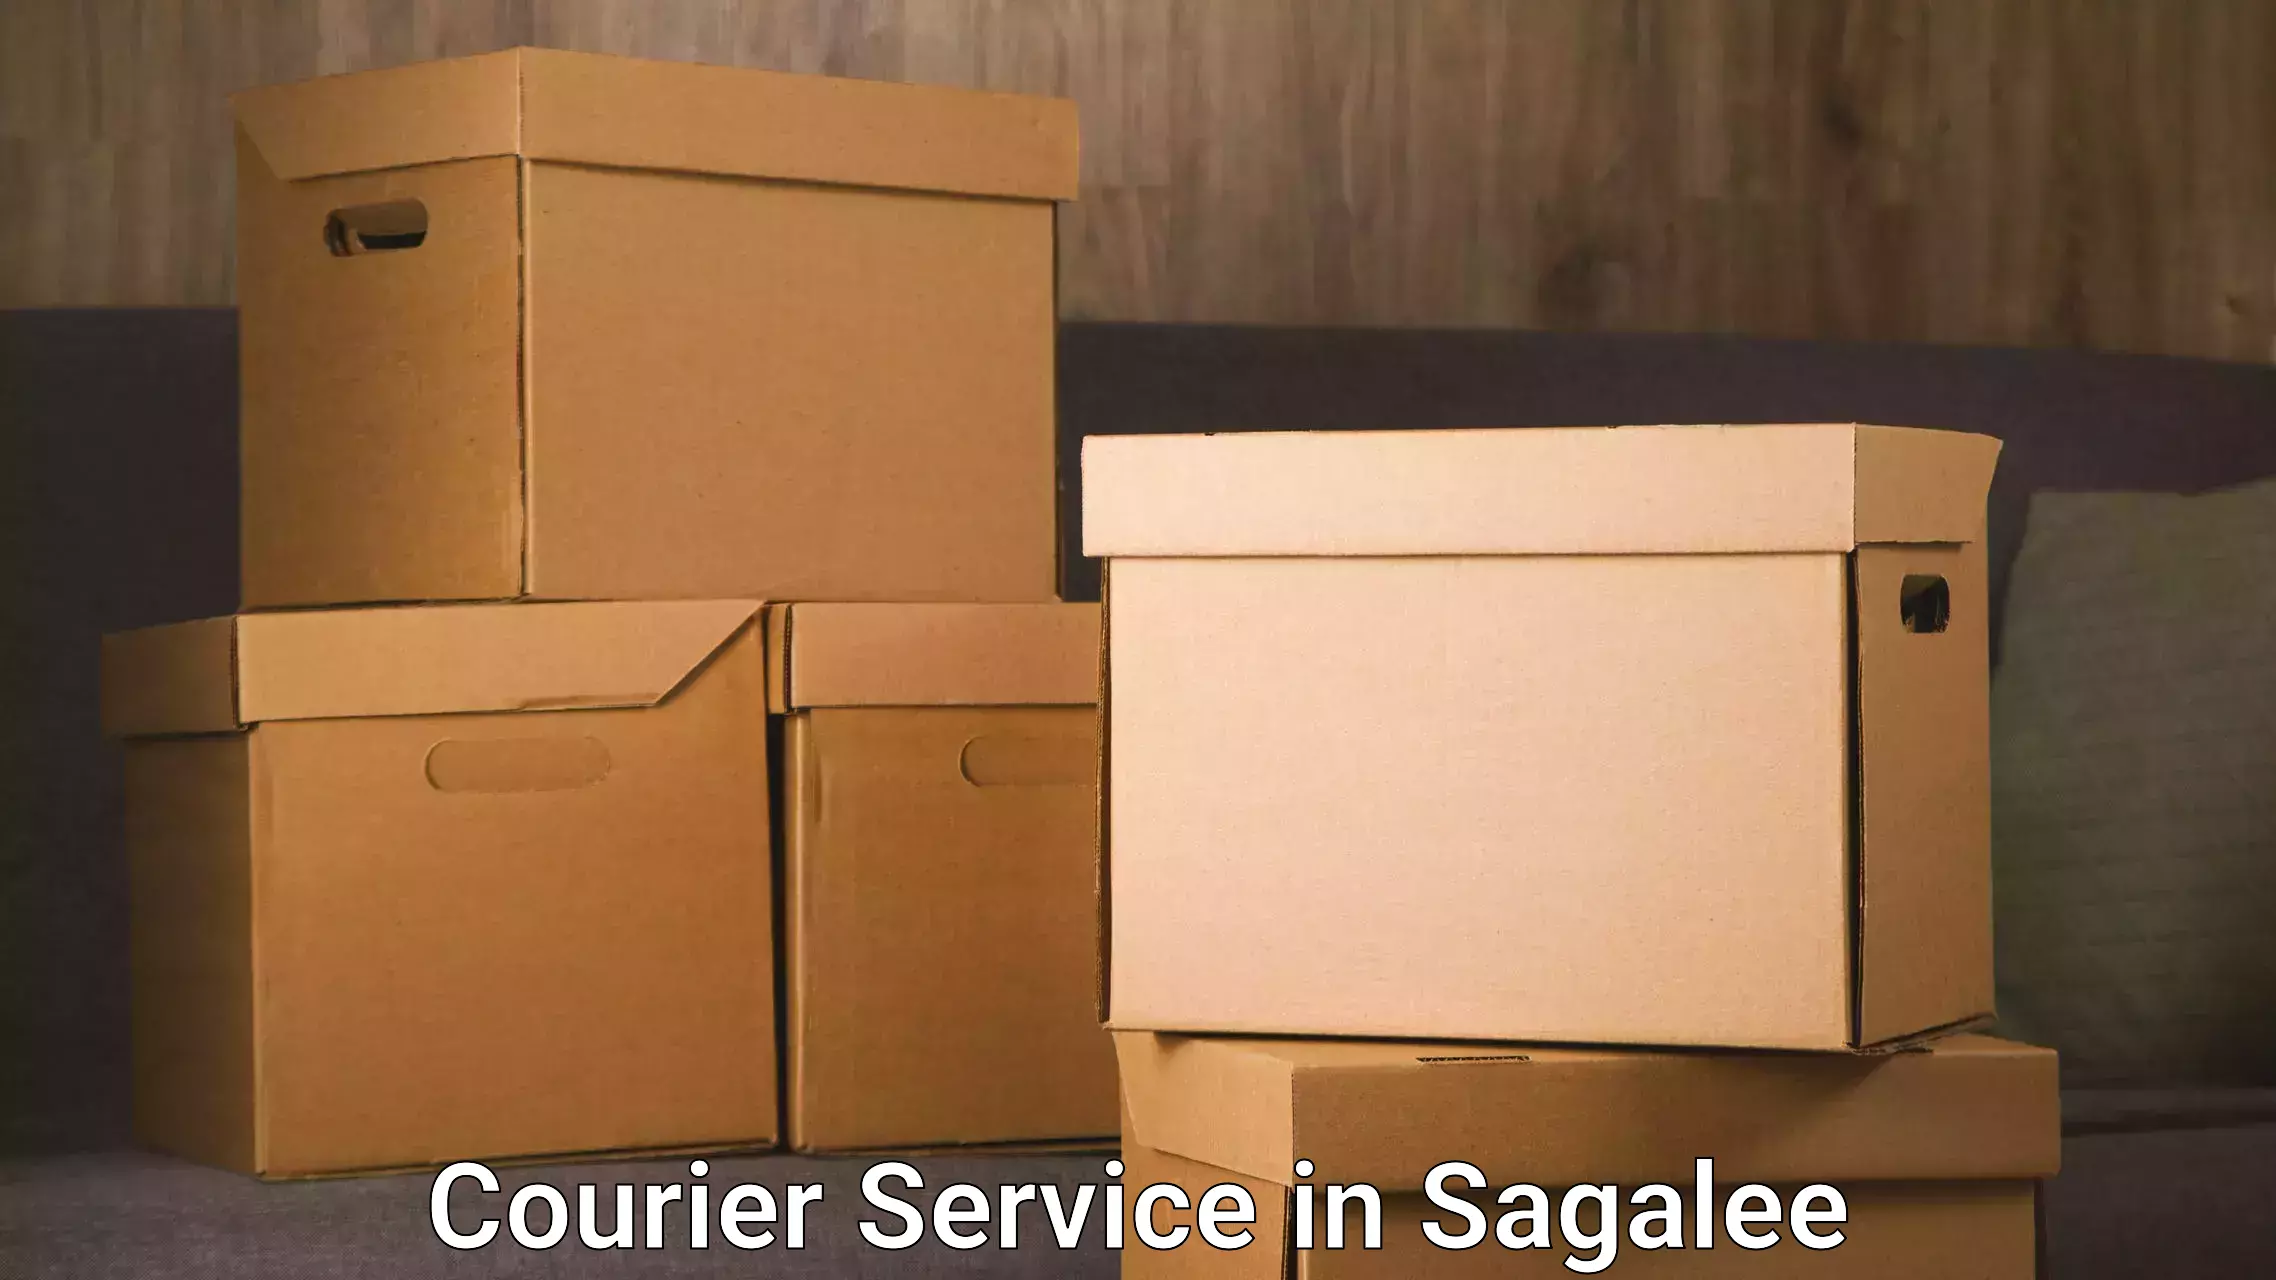 Fast delivery service in Sagalee